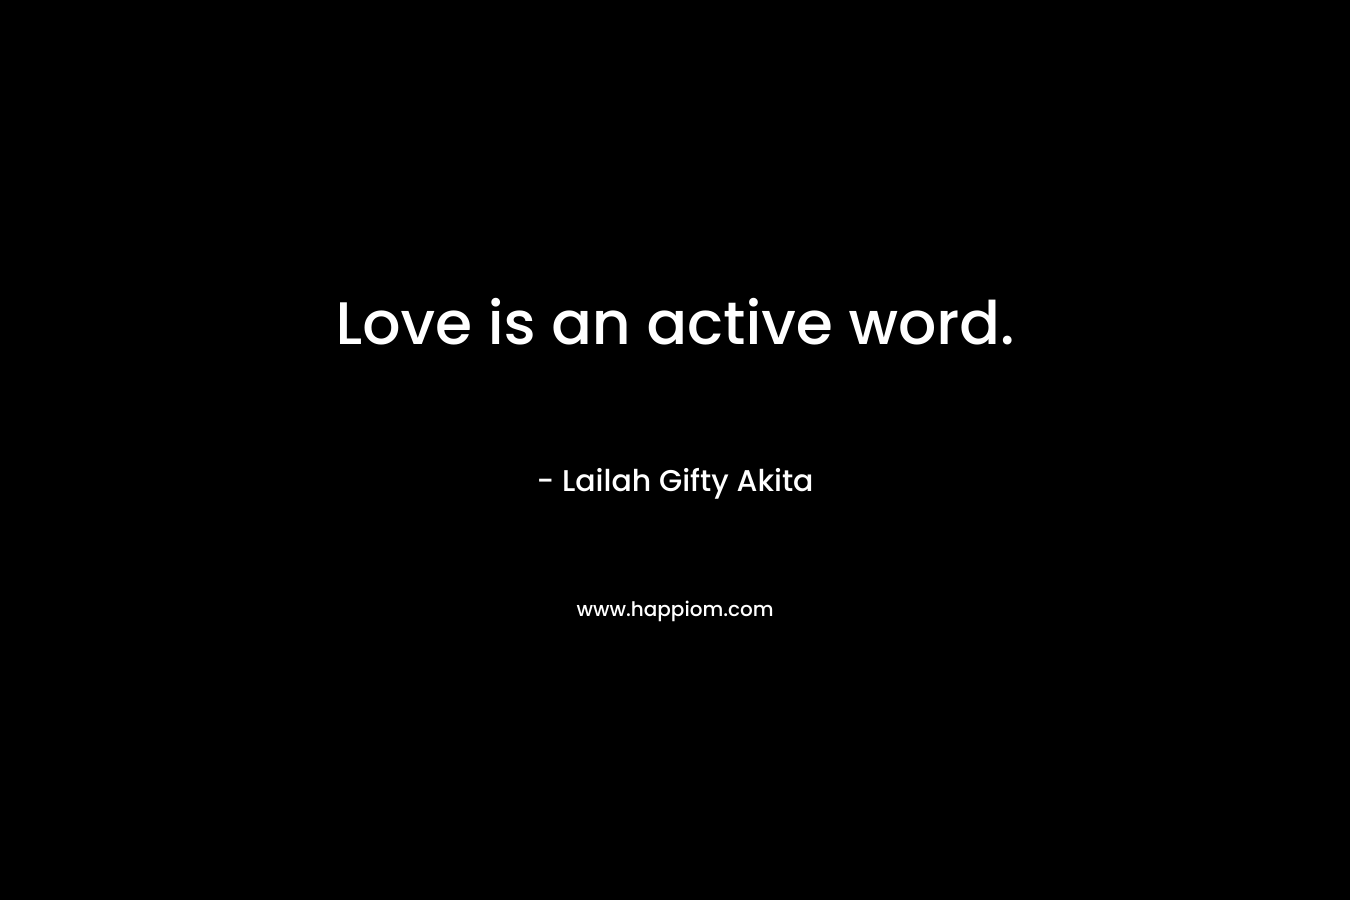 Love is an active word.